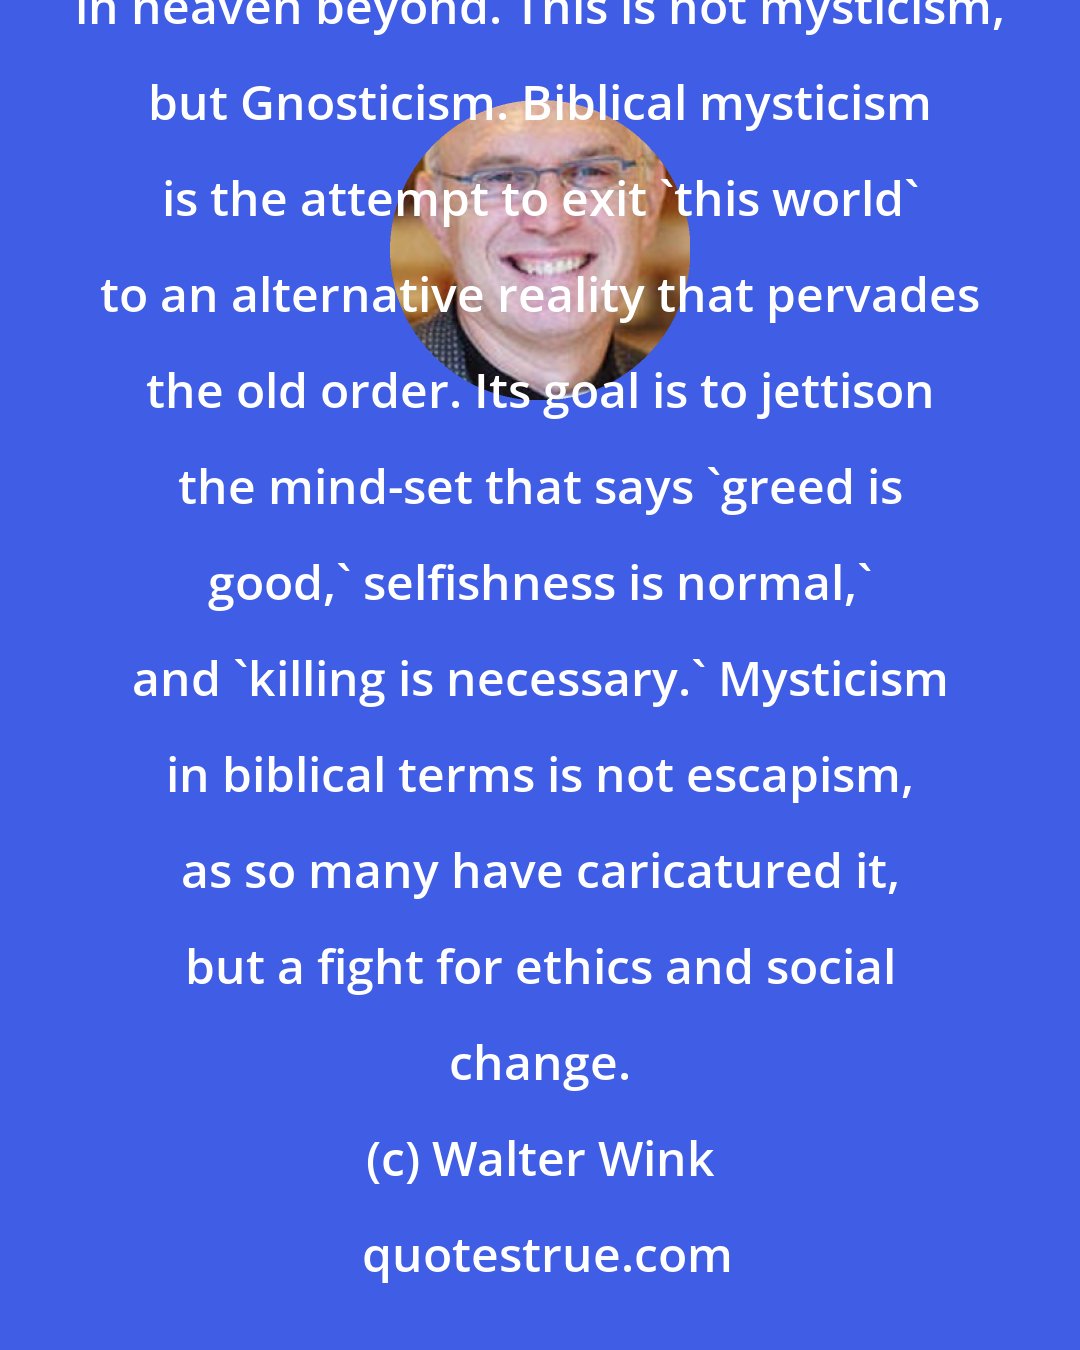 Walter Wink: Mysticism has often been misunderstood as the attempt to escape this simple, phenomenal world to a more pure existence in heaven beyond. This is not mysticism, but Gnosticism. Biblical mysticism is the attempt to exit 'this world' to an alternative reality that pervades the old order. Its goal is to jettison the mind-set that says 'greed is good,' selfishness is normal,' and 'killing is necessary.' Mysticism in biblical terms is not escapism, as so many have caricatured it, but a fight for ethics and social change.